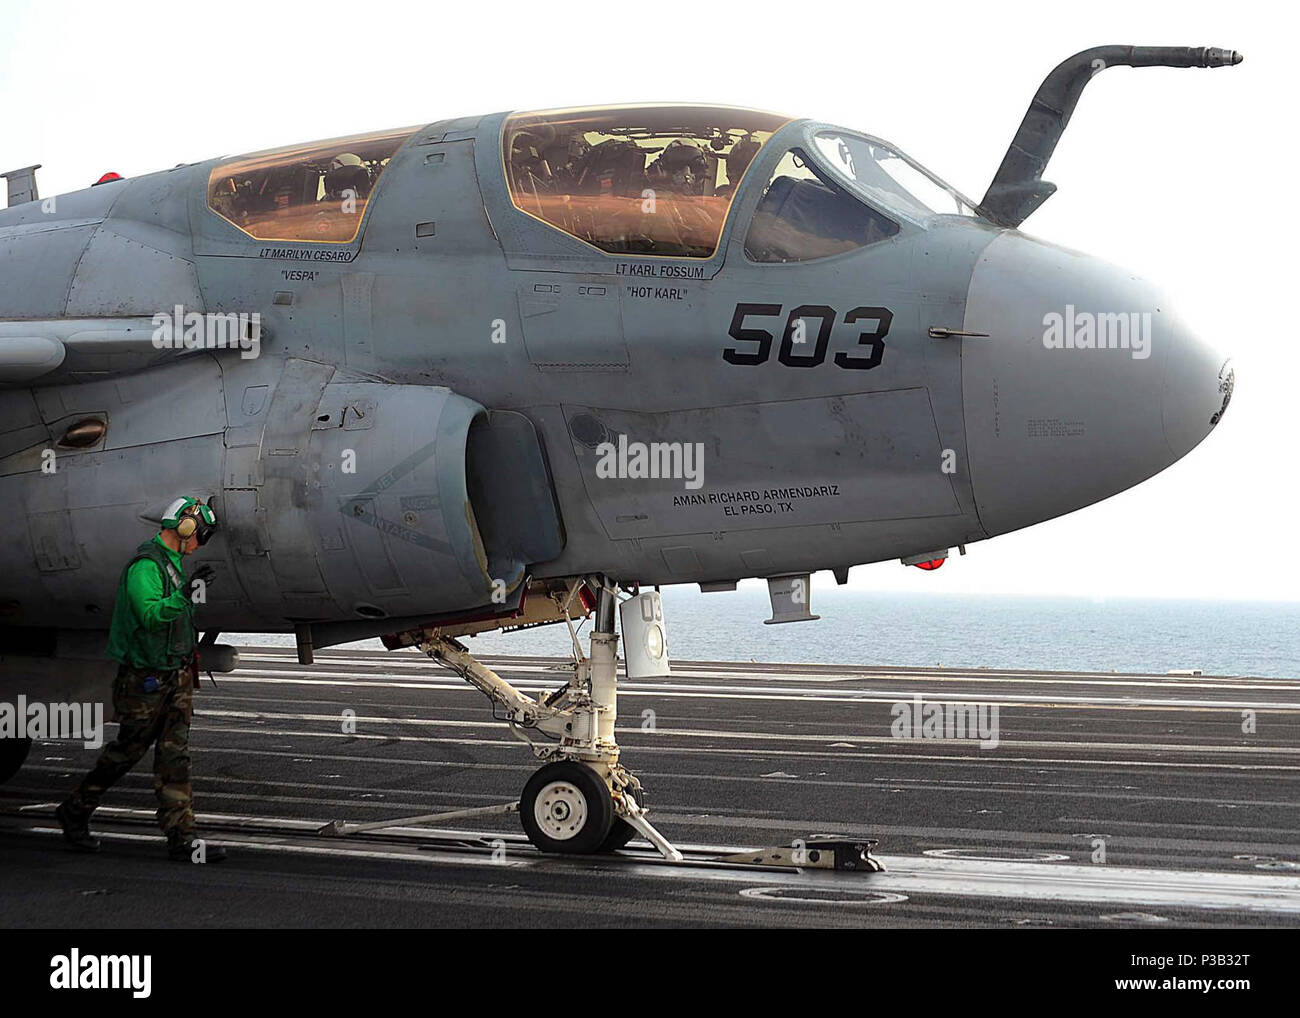 OF OMAN (Dec. 17, 2008) Cmdr. David J. Bryson prepares to launch an EA-6B Prowler assigned to the 'Shadowhawks' of Electronic Attack Squadron (VAQ) 141 from the flight deck of the aircraft carrier USS Theodore Roosevelt (CVN 71) before an in-air change of command ceremony. Bryson is relieving Cmdr. Michael D. McKenna as the commanding officer of VAQ-141. Theodore Roosevelt and Carrier Air Wing (CVW) 8 are conducting operations in the U.S. 5th Fleet area of responsibility and are focused on reassuring regional partners of the United States' commitment to security, which promotes stability and g Stock Photo